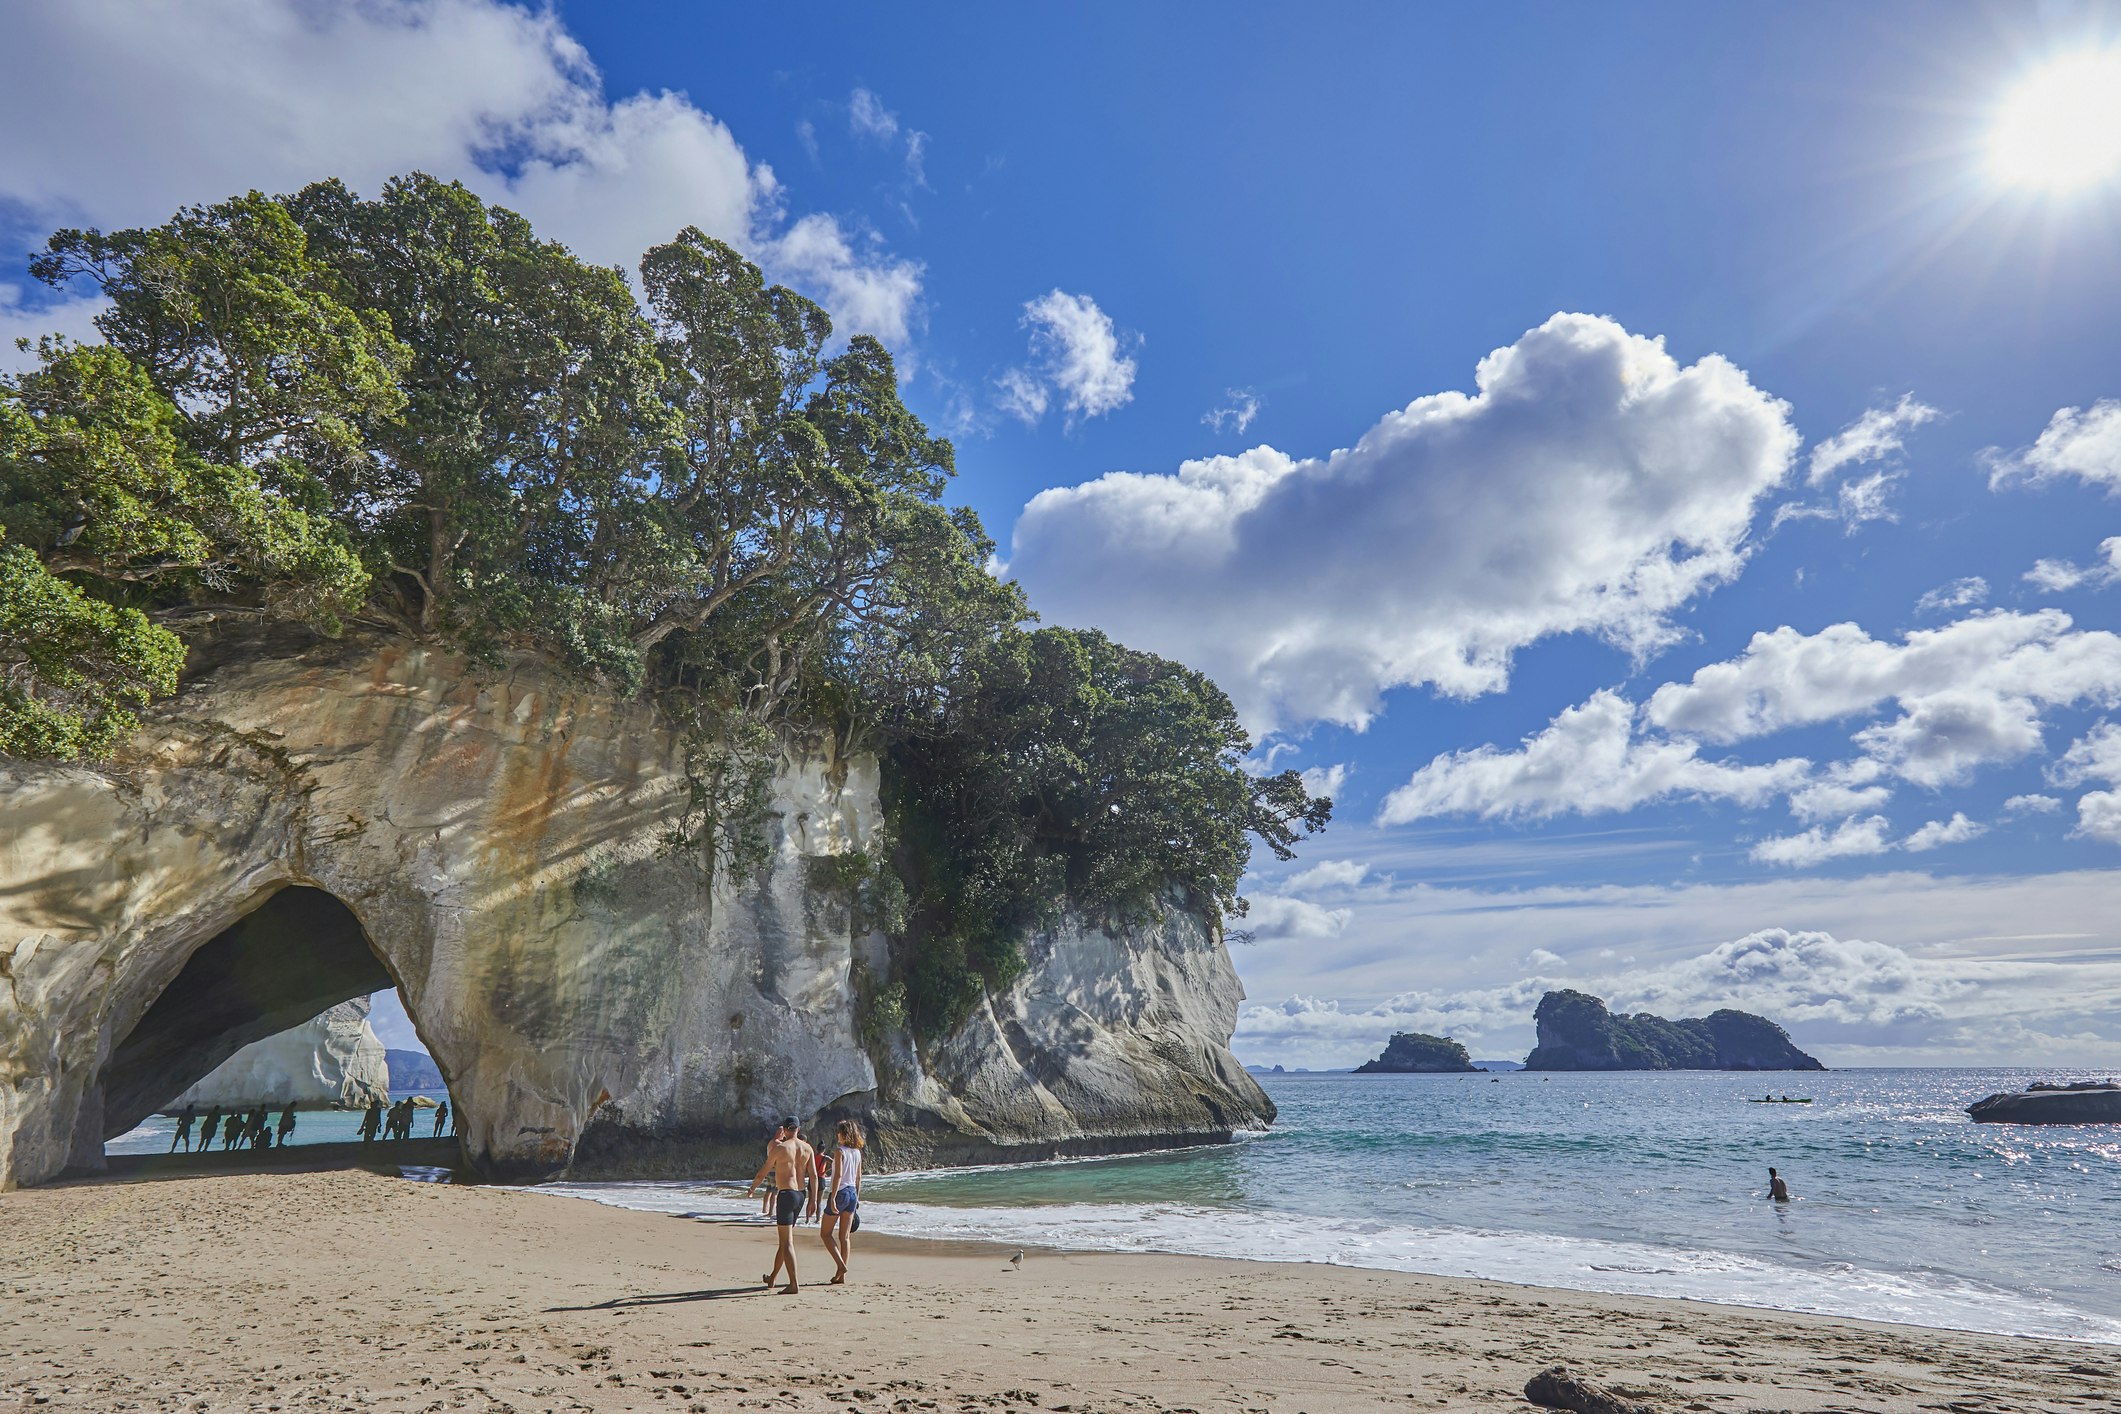 A huge rock archway is a distinctive feature on a sandy beach